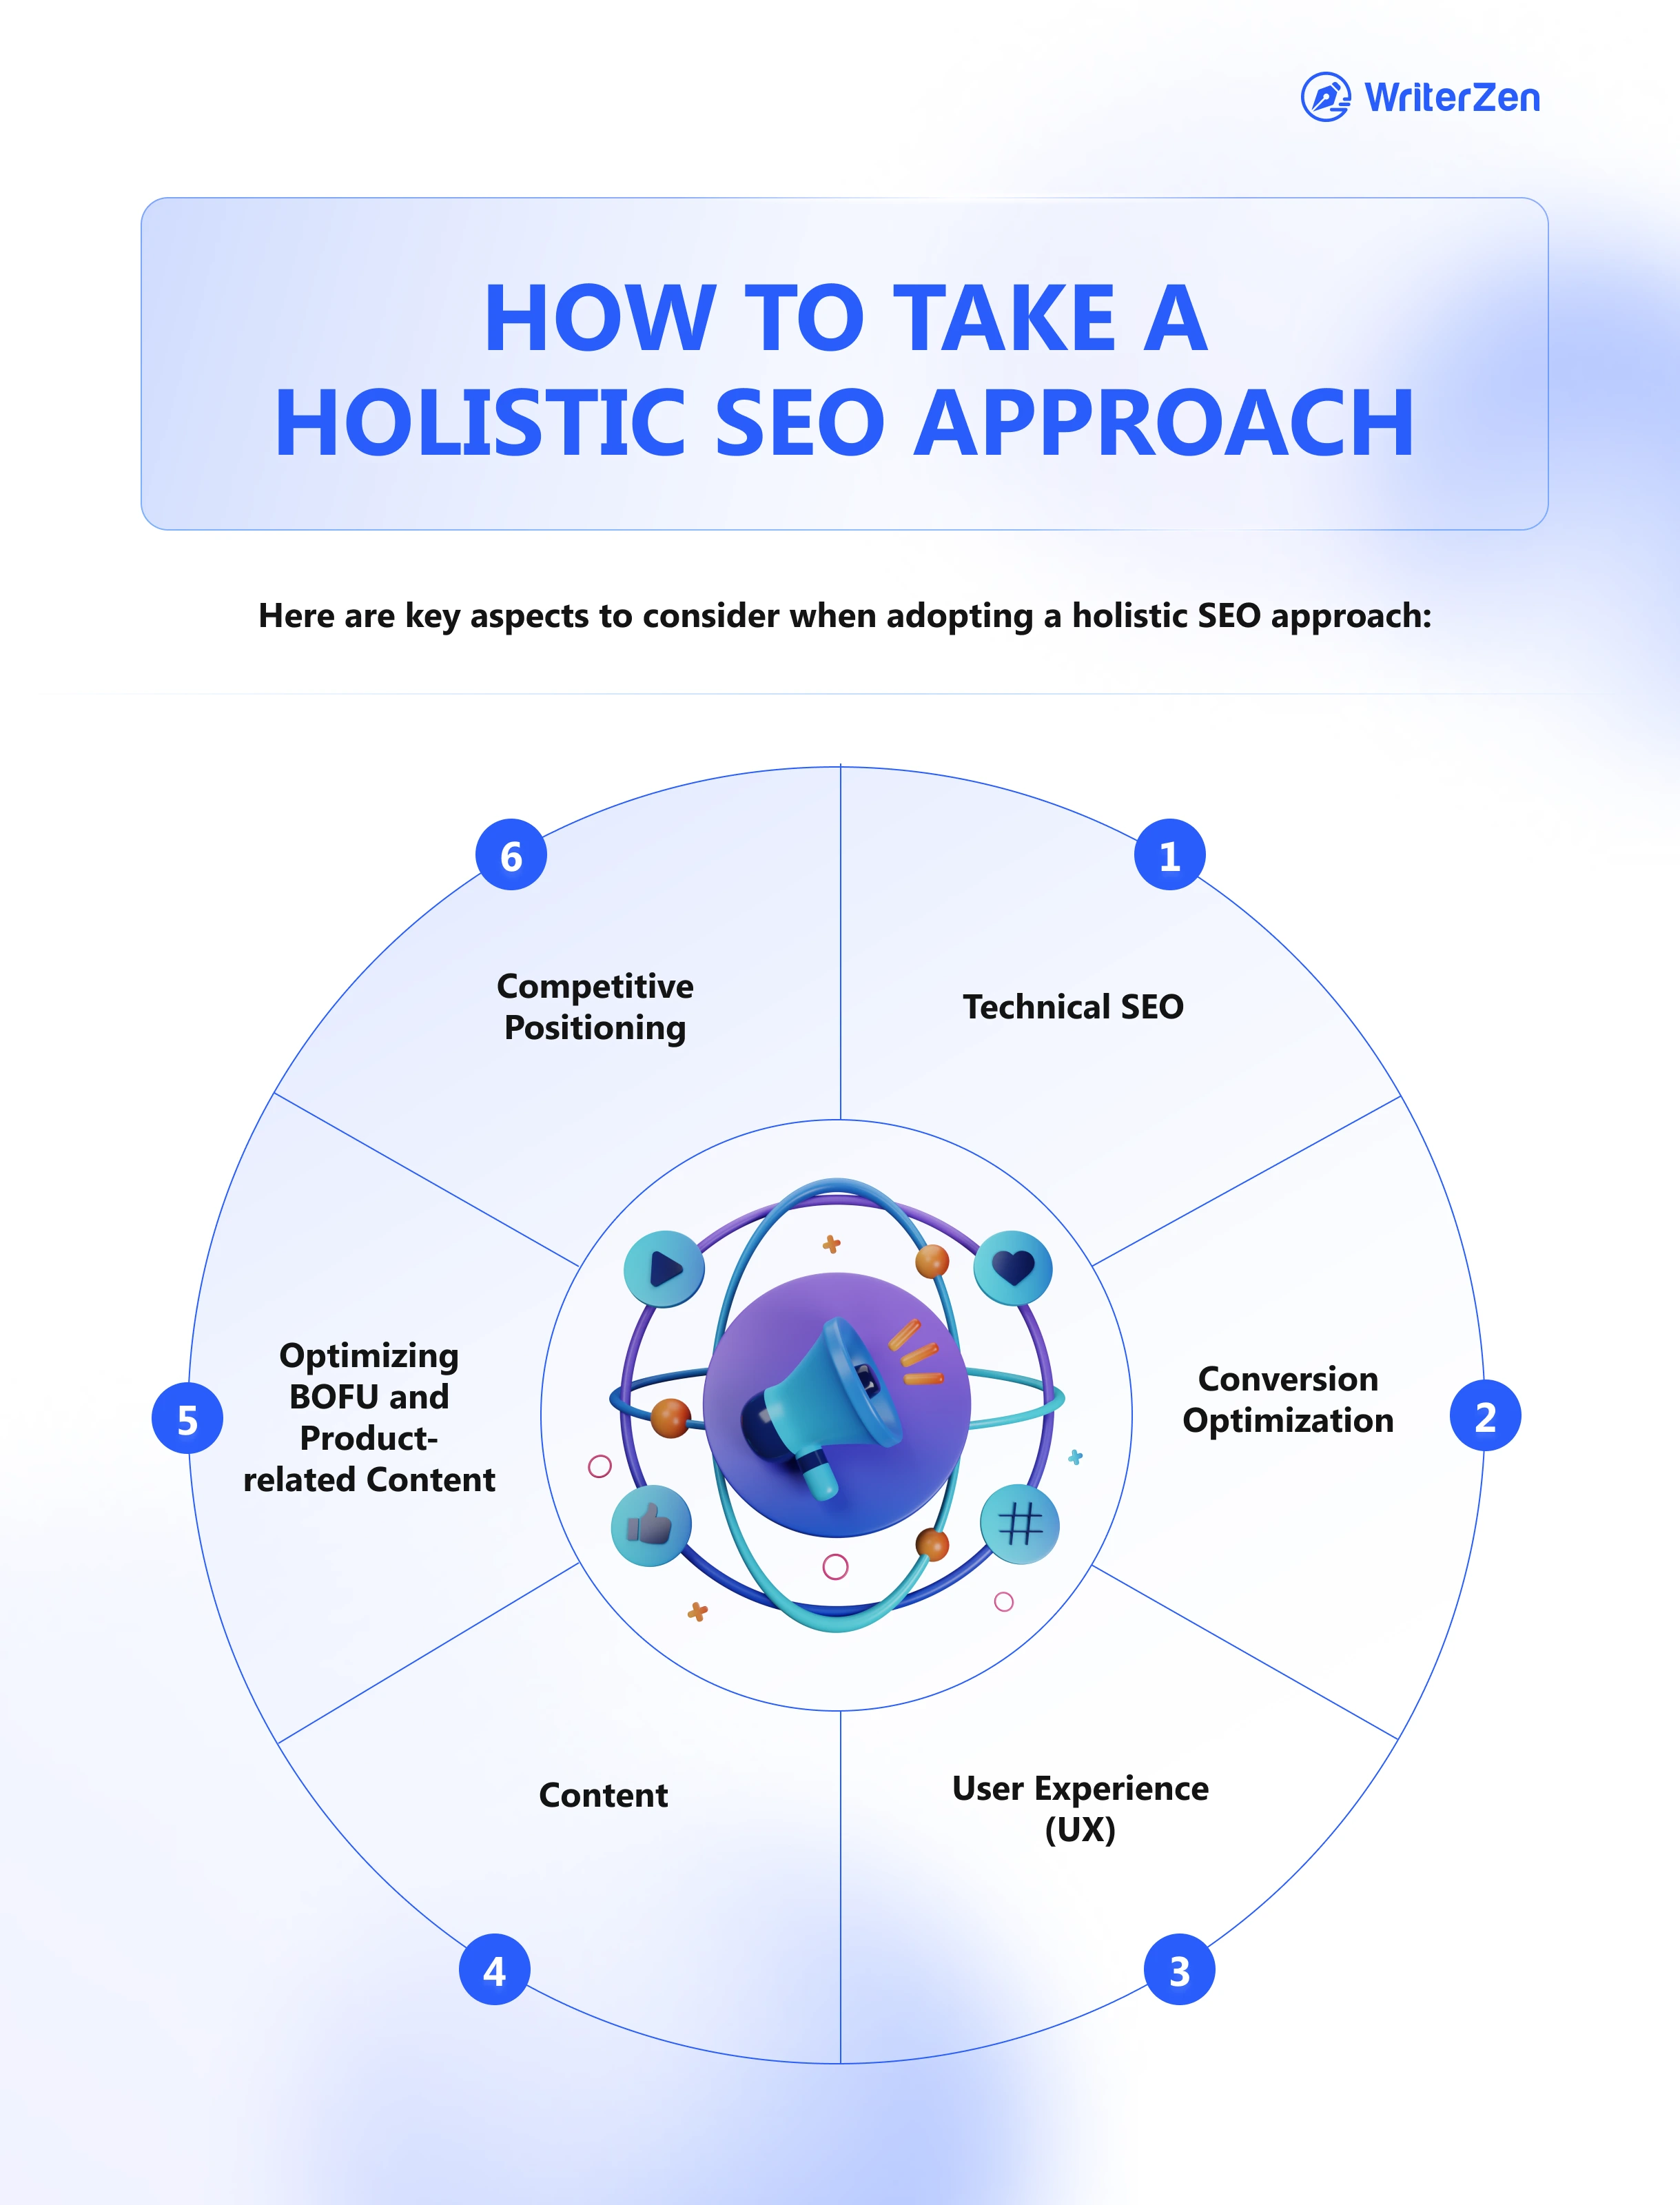 Key Aspects to Consider when Adopting a Holistic SEO Approach